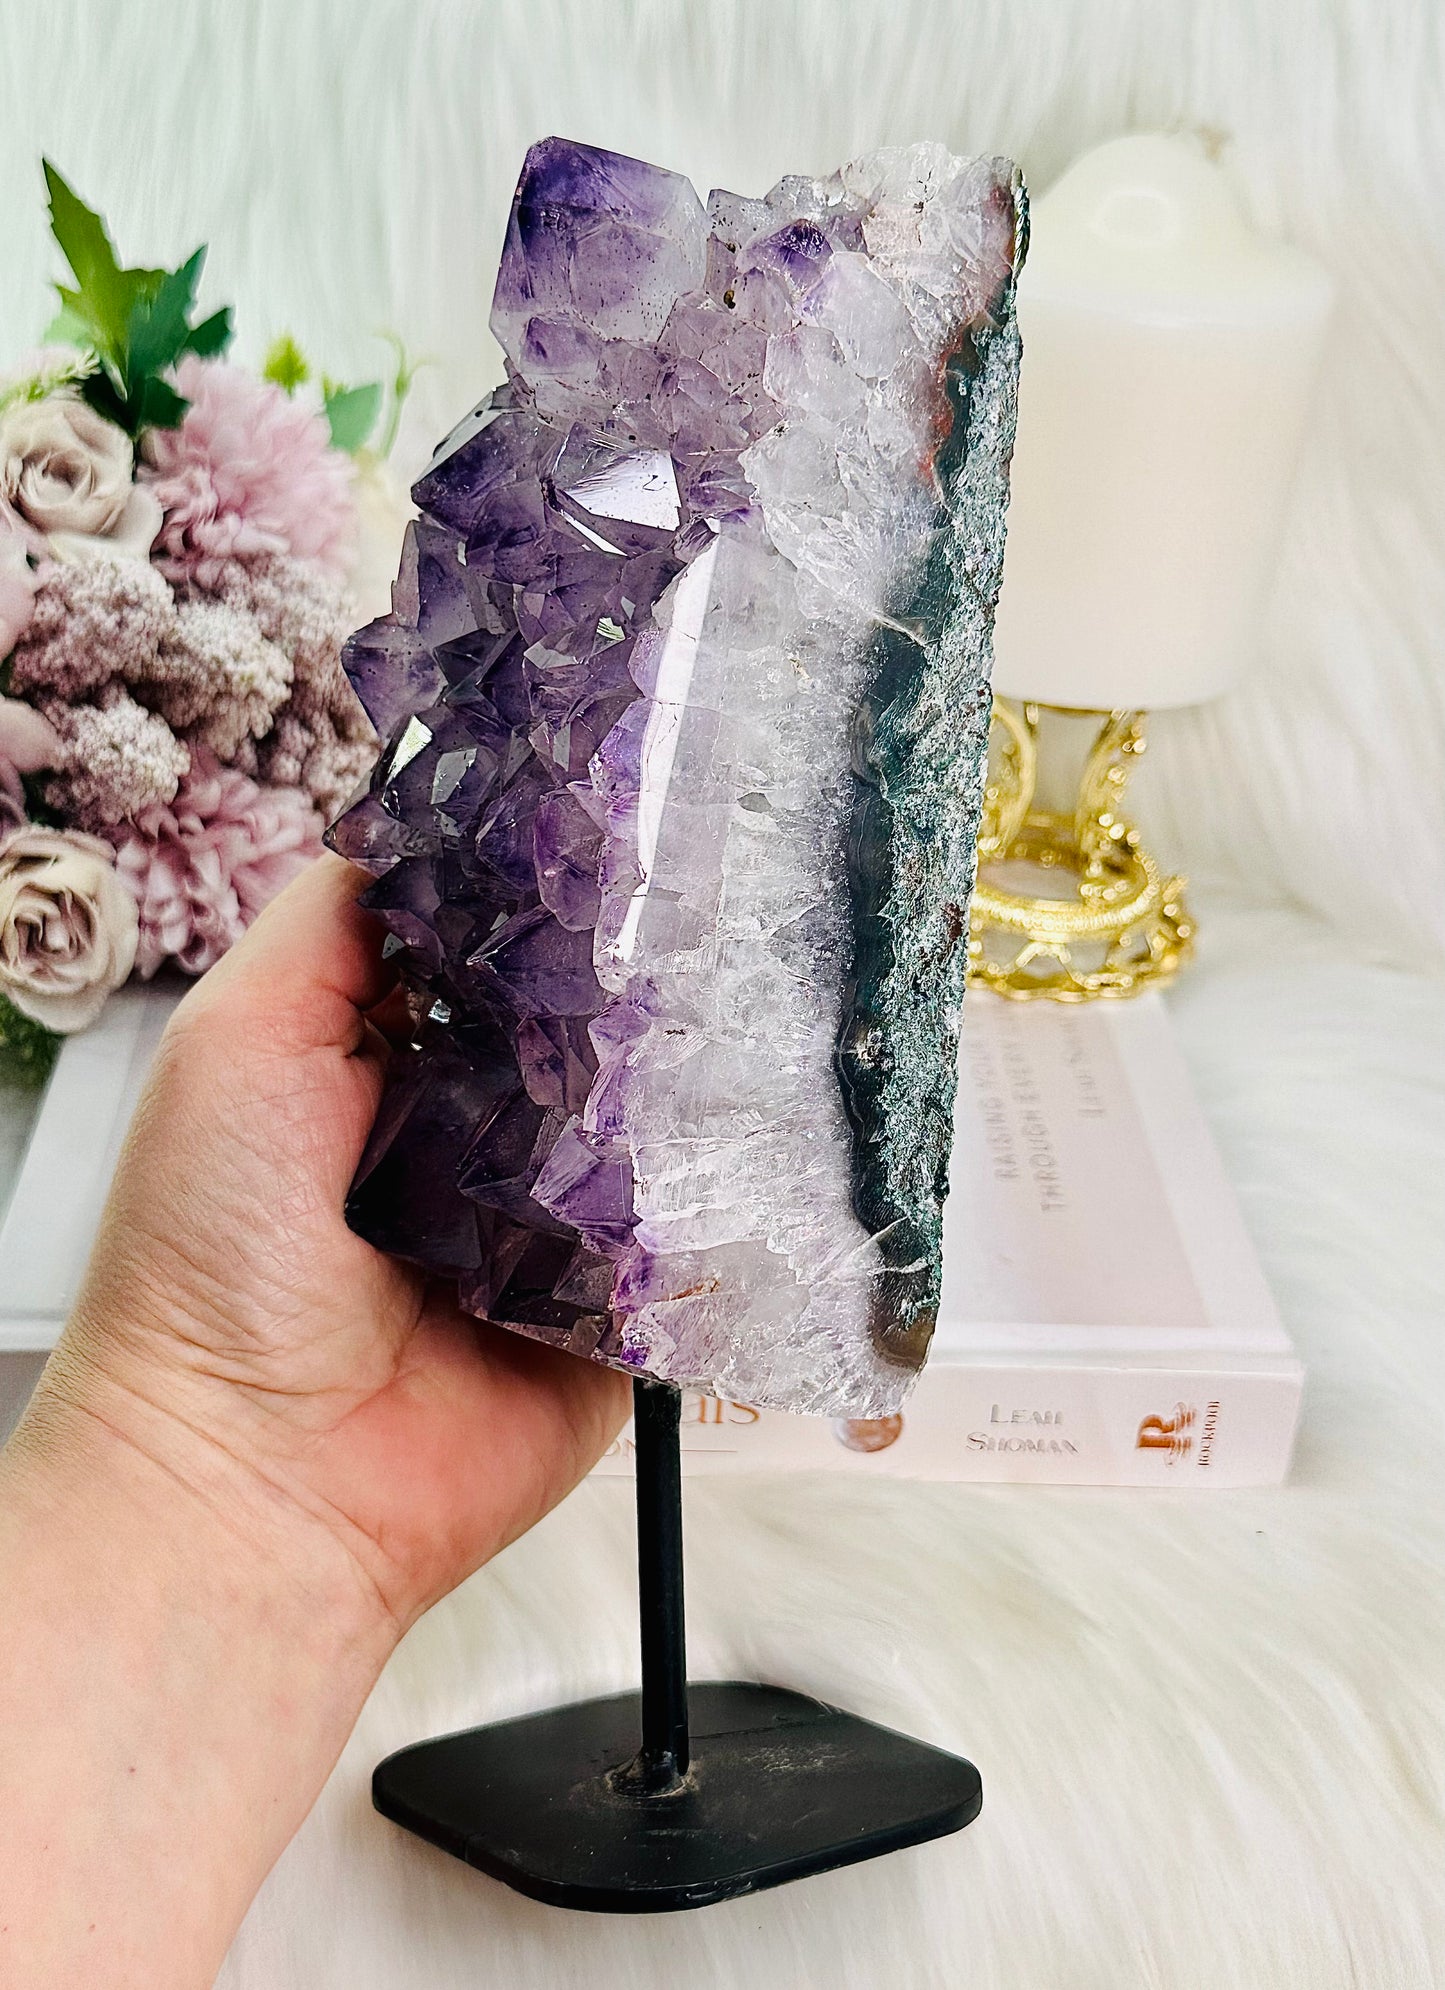 WOW!!!! Classy & Fabulous Large 1.4KG 22cm High Grade Chunky Amethyst Agate Cluster On Stand From Brazil ~ A Truly Exquisite Piece